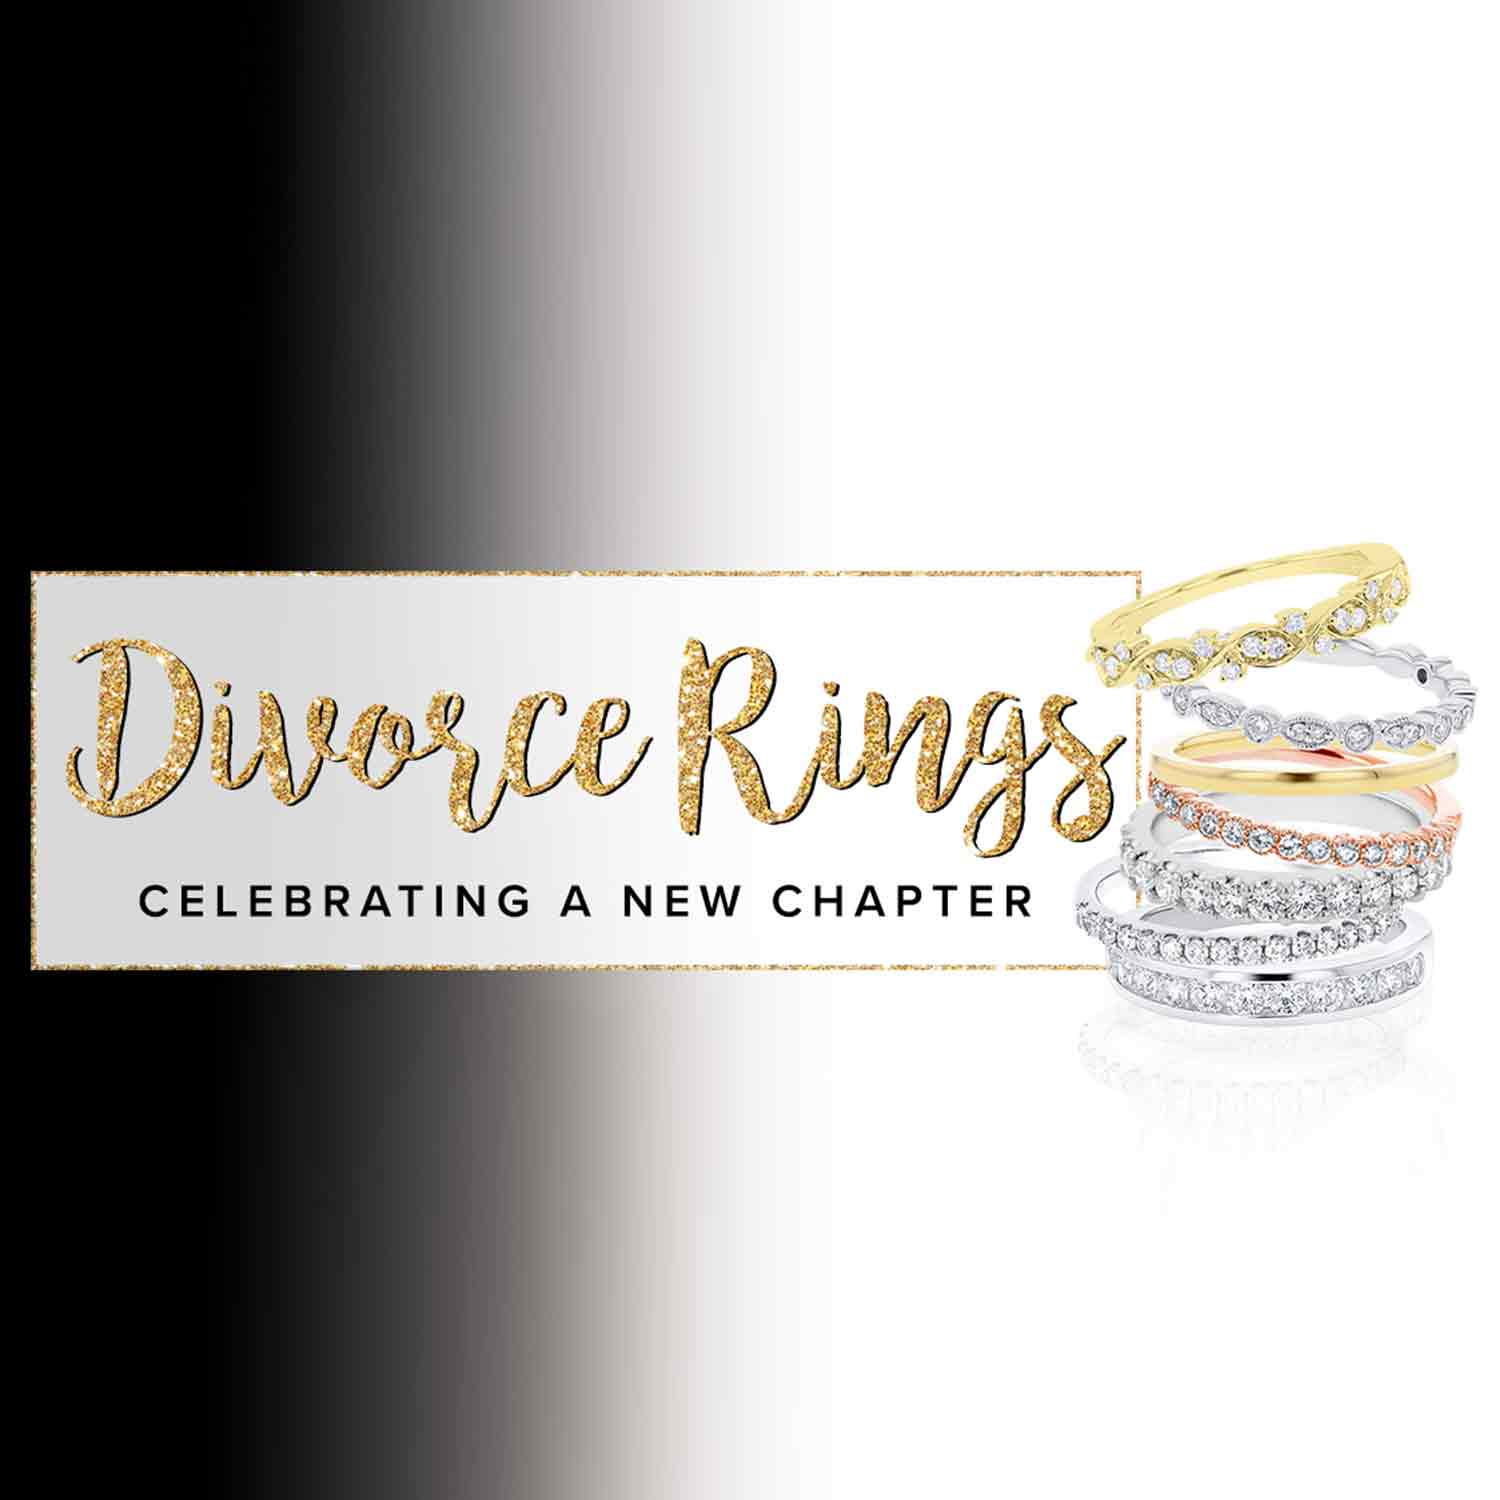 Divorce rings celebrating a new chapter.